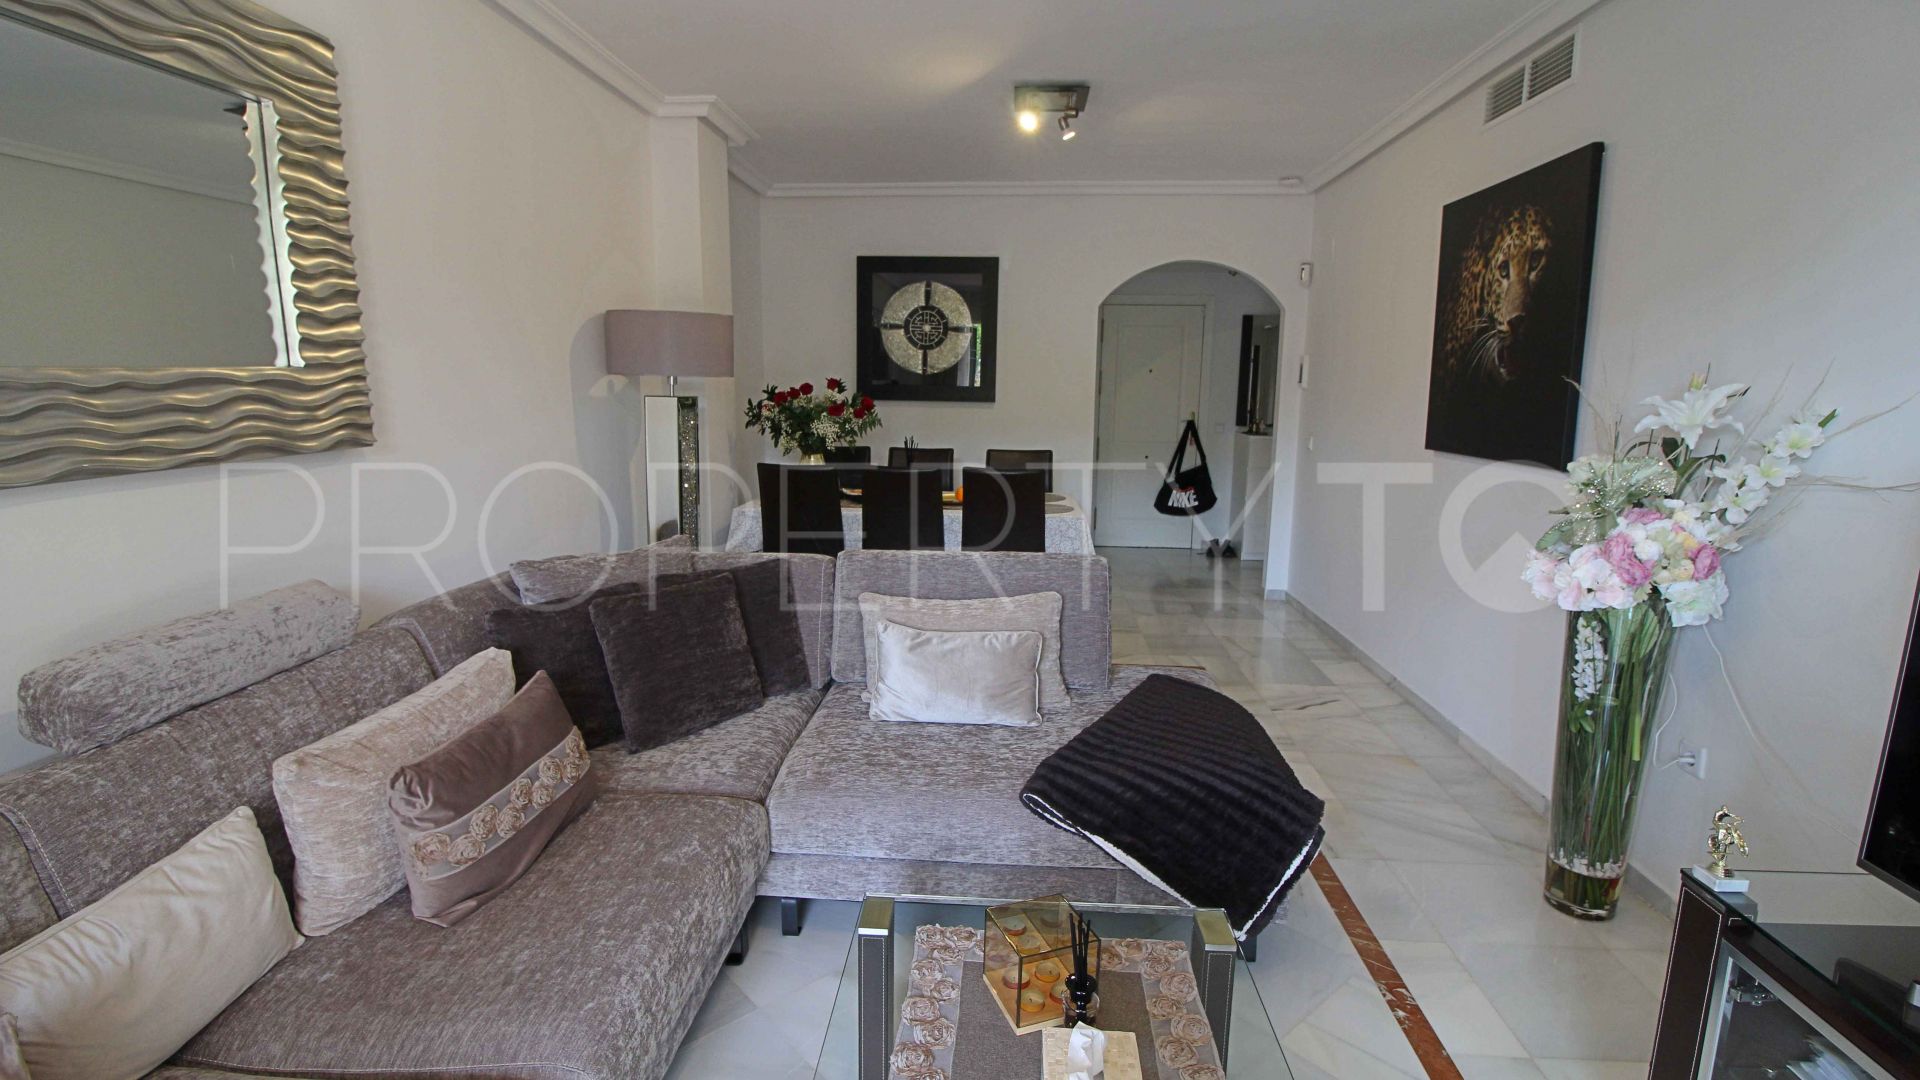 For sale Lorcrimar ground floor apartment with 2 bedrooms